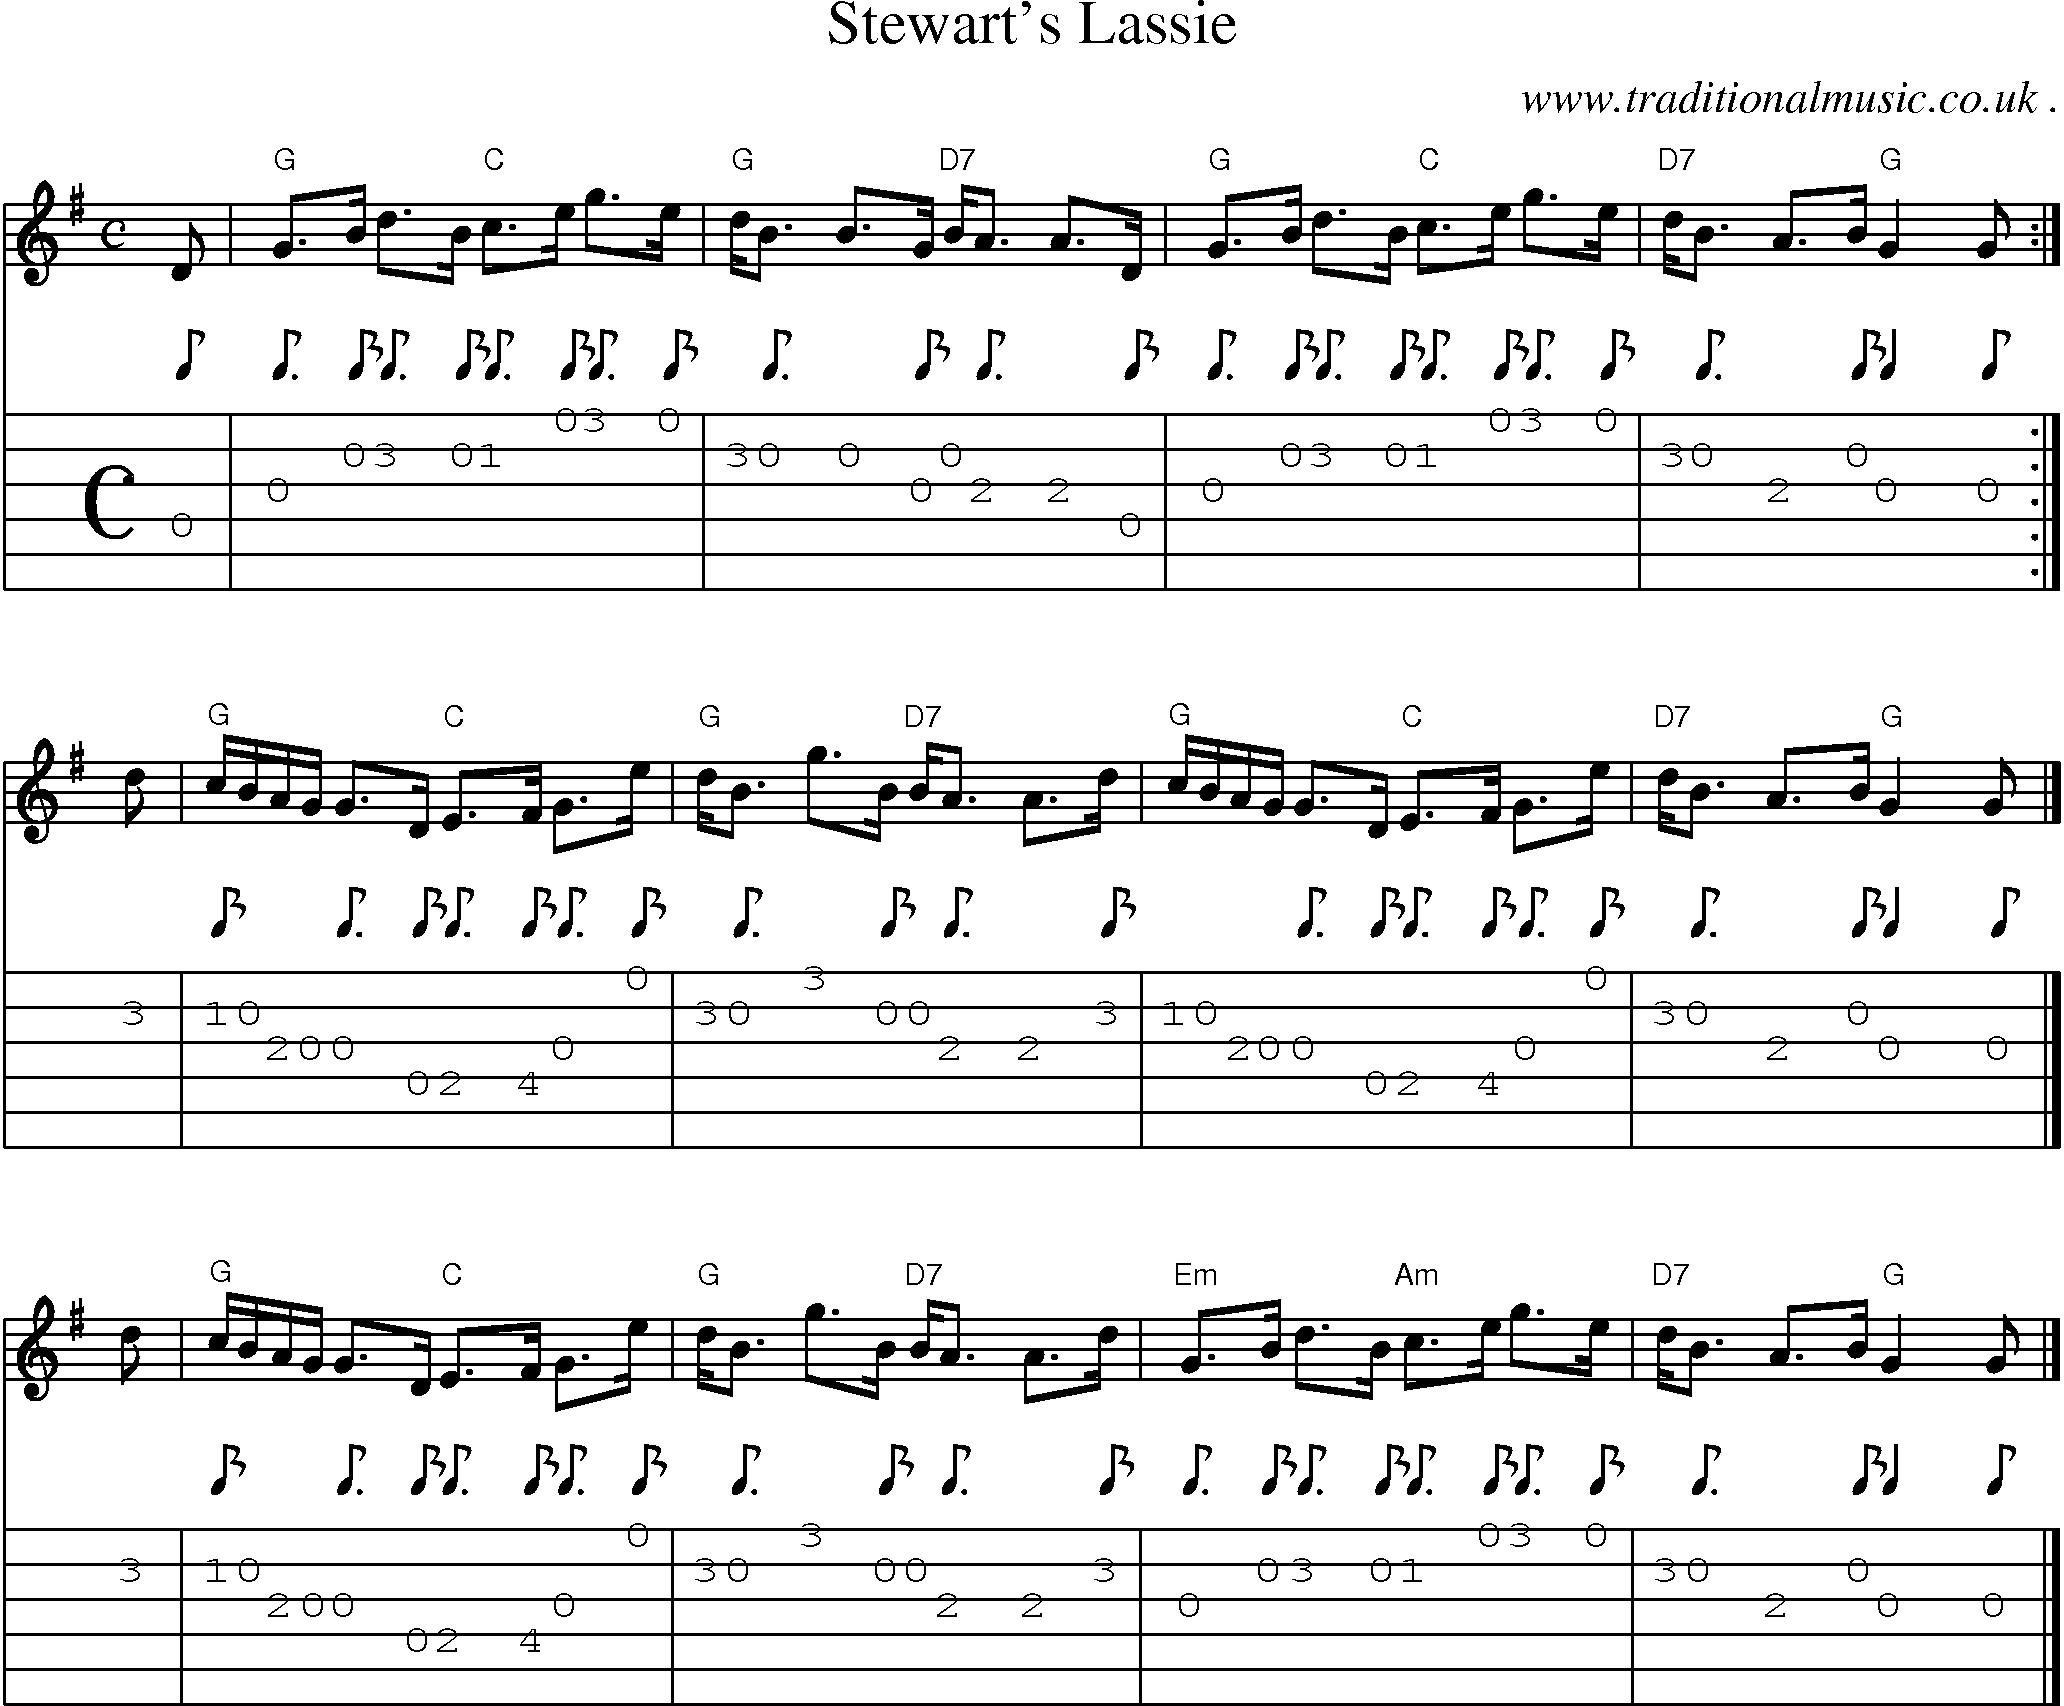 Sheet-music  score, Chords and Guitar Tabs for Stewarts Lassie